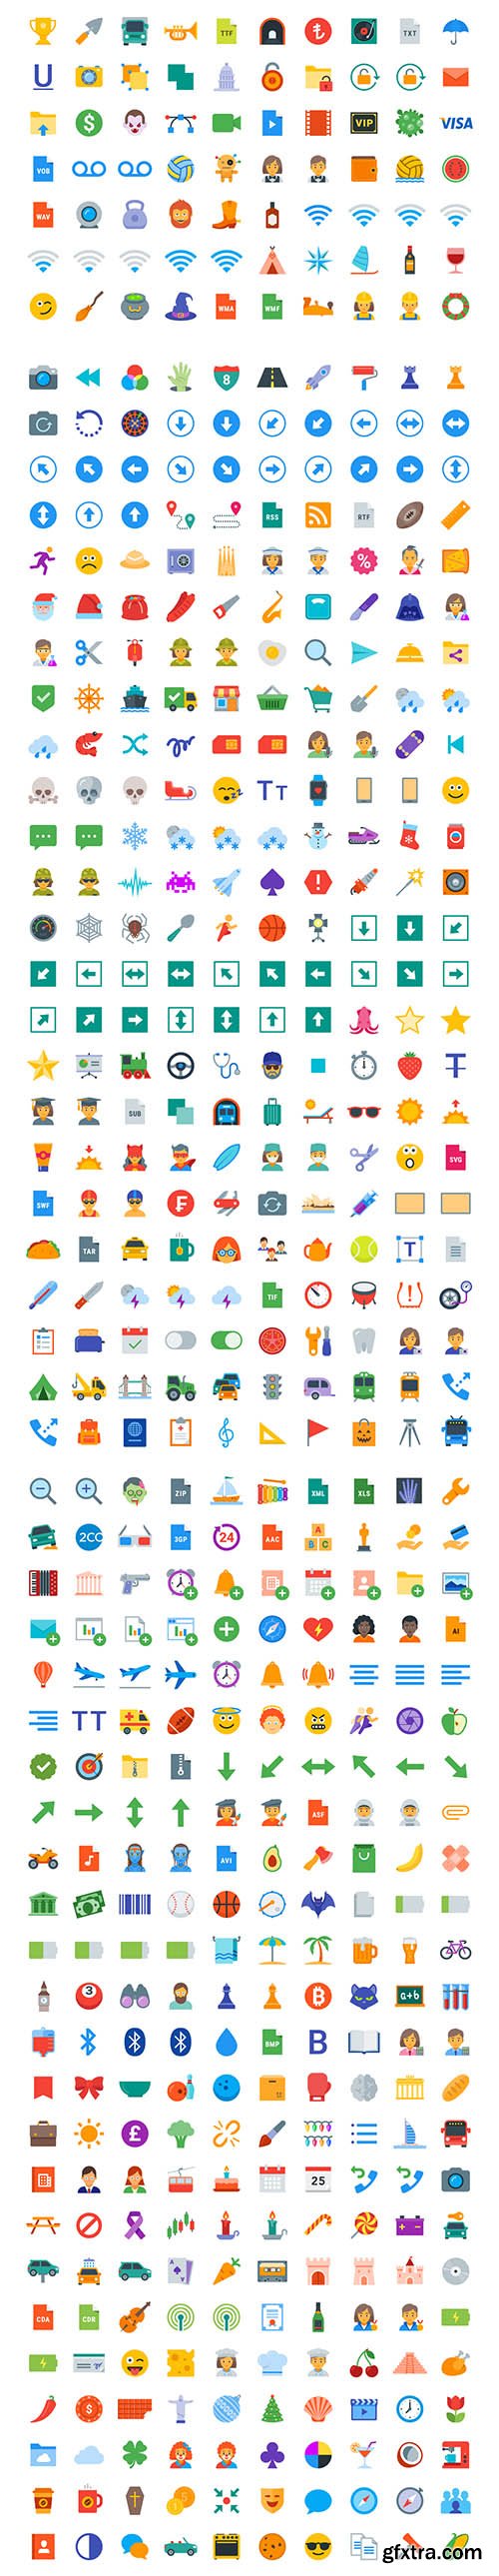 1000 Flat Color Icons